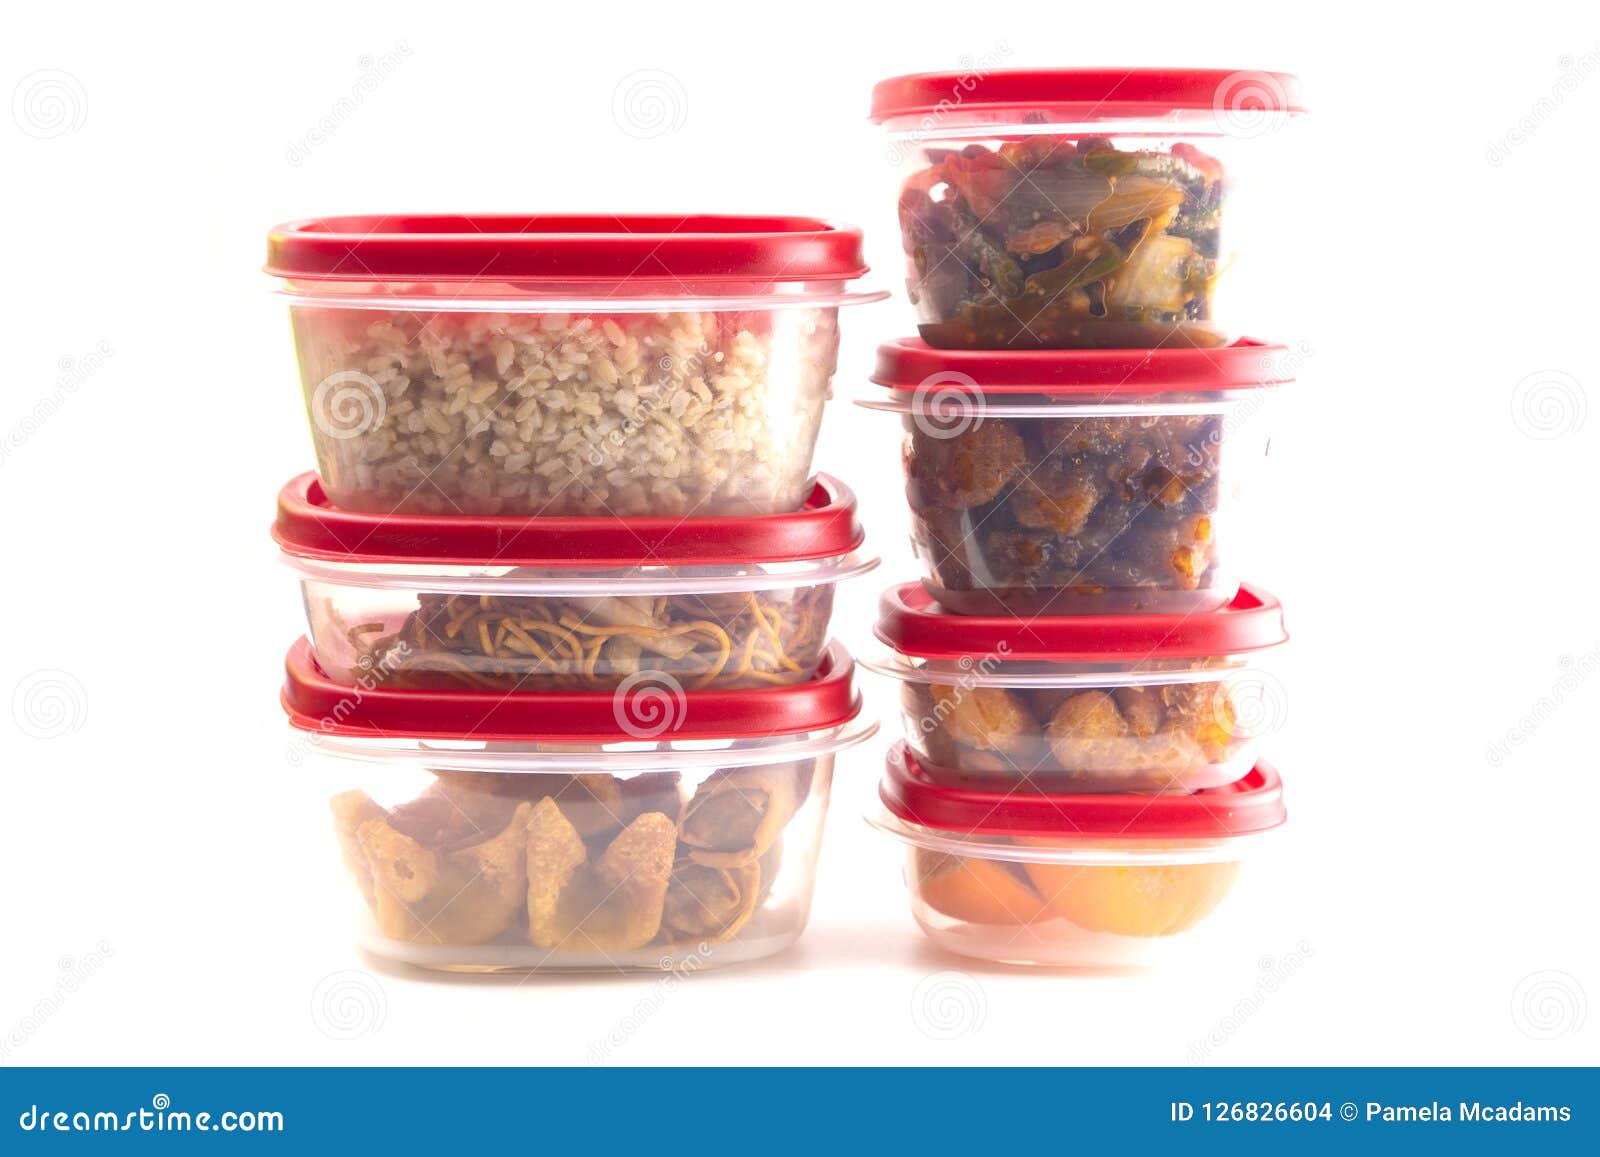 boxes with red lids filled with leftover food